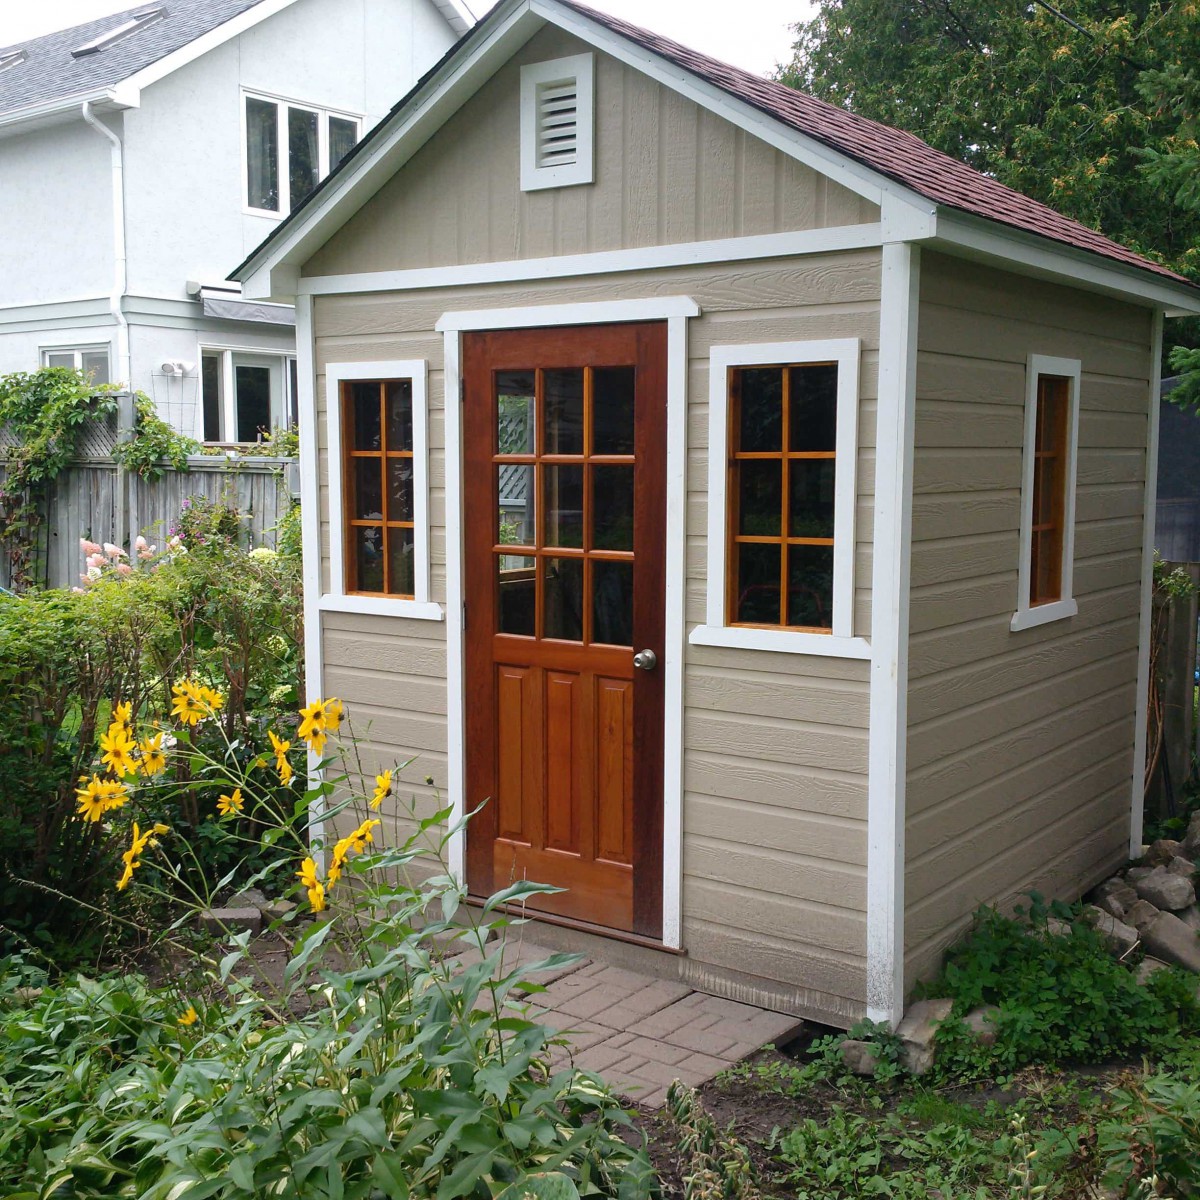 Canexel Palmerstone Shed design 8' x 8' in the backyard with a windows on the side. ID number  5722